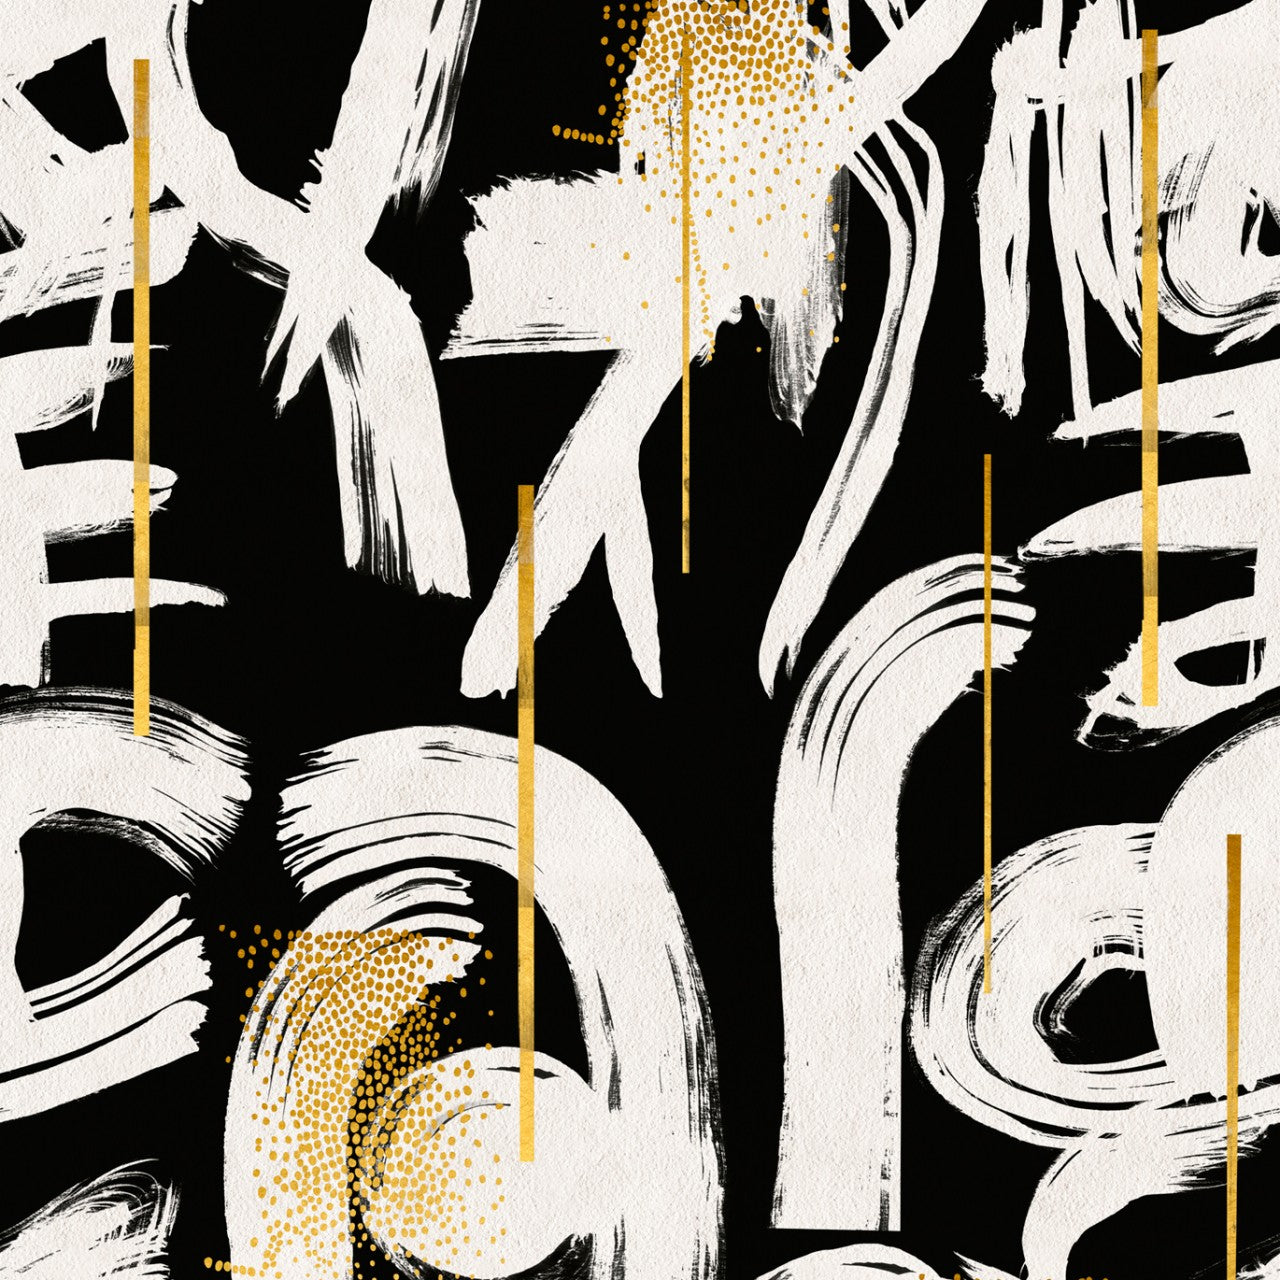 Shop Gestural Abstraction Wallpaper in Black, White, and Gold from the ...